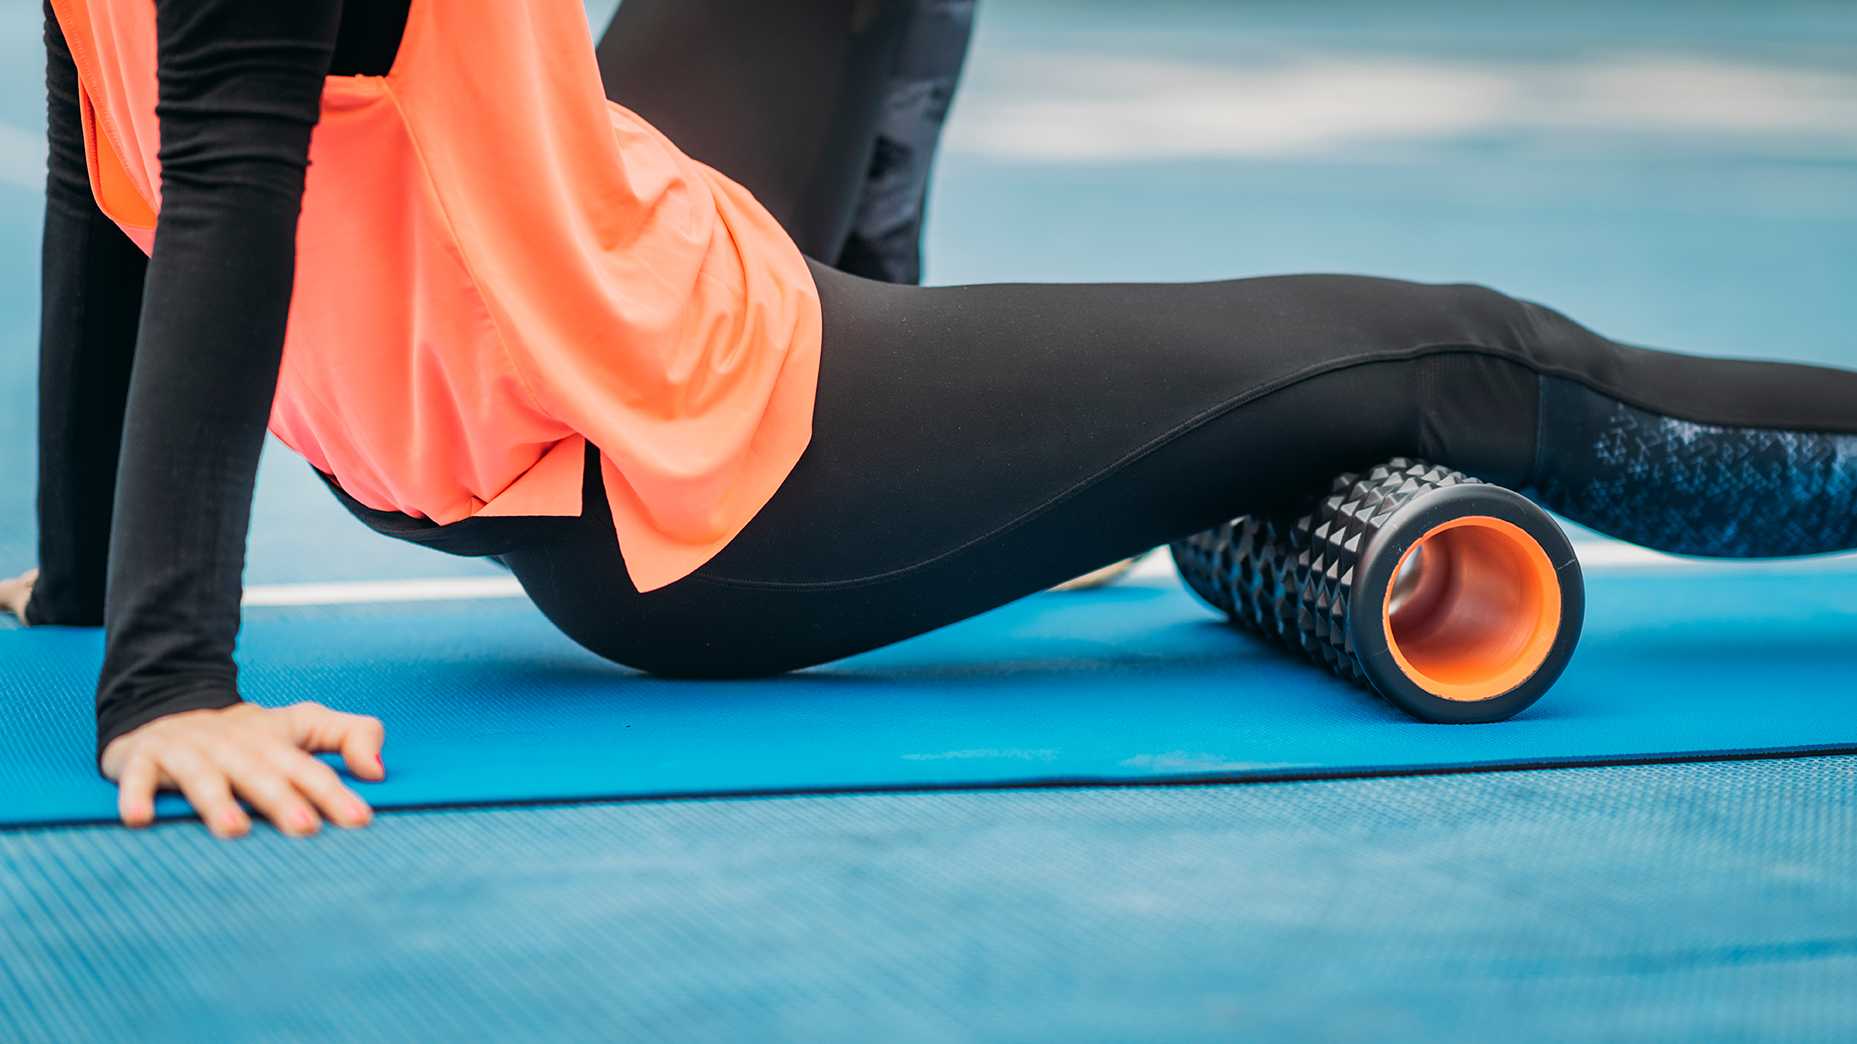 How to Use a Foam Roller Correctly